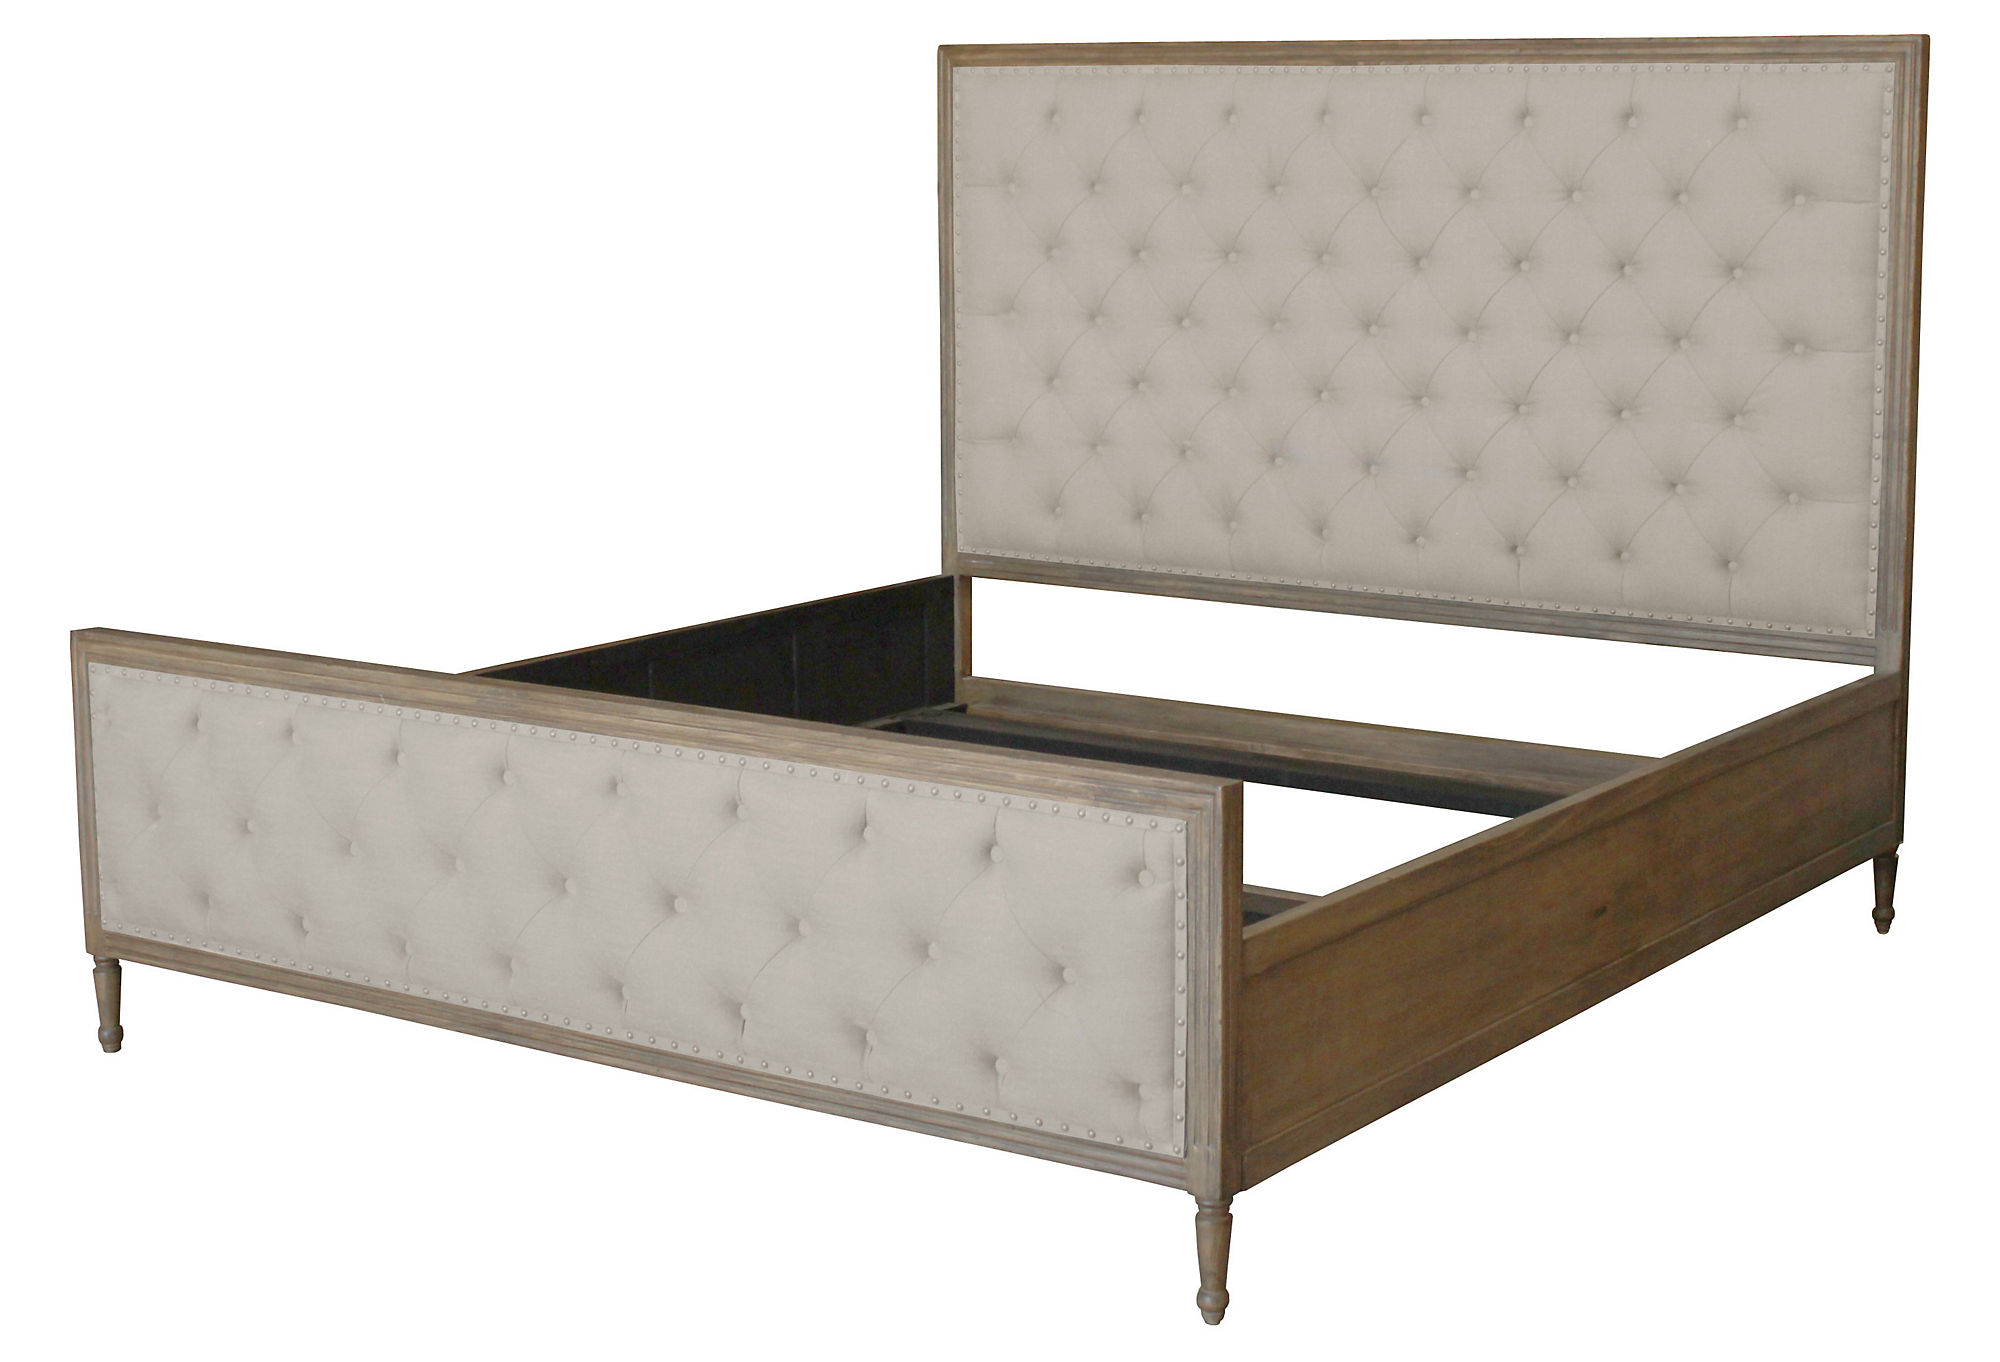 bed headboard beds headboards modern furniture frame upholstered wooden pictures of pine